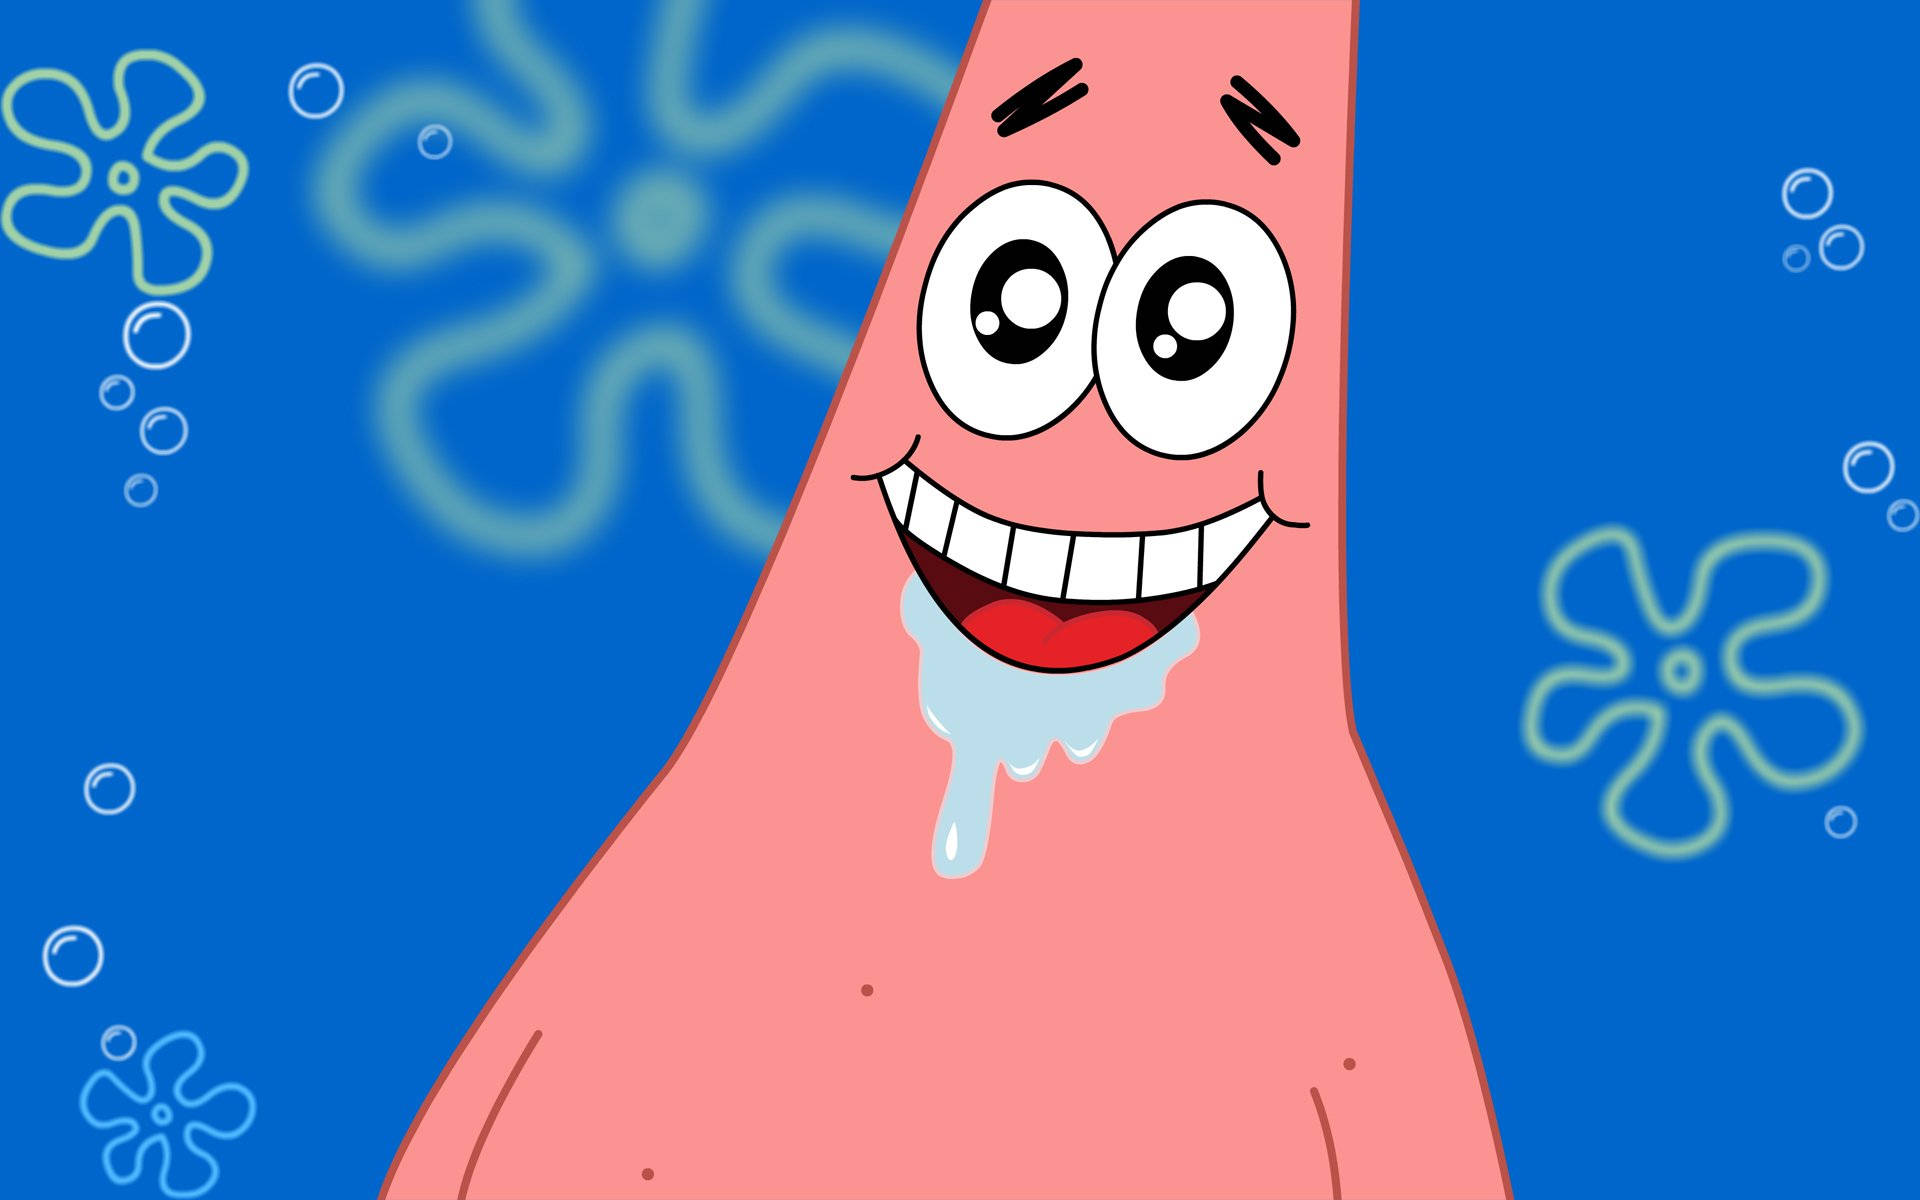 "Patrick has something hilariously silly to say!" Wallpaper